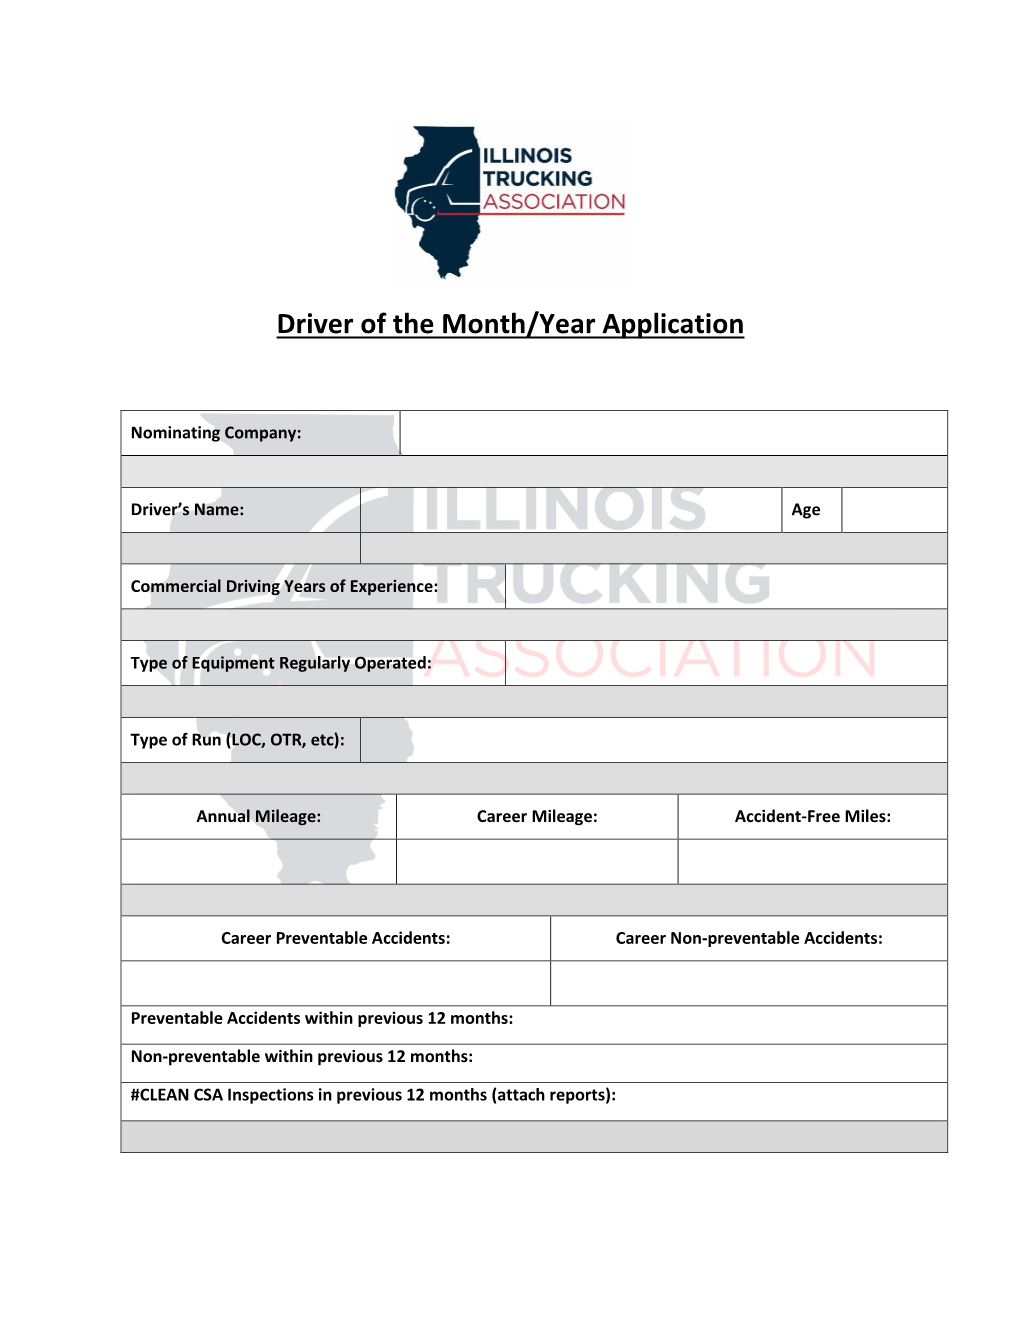 Driver of the Month/Year Application